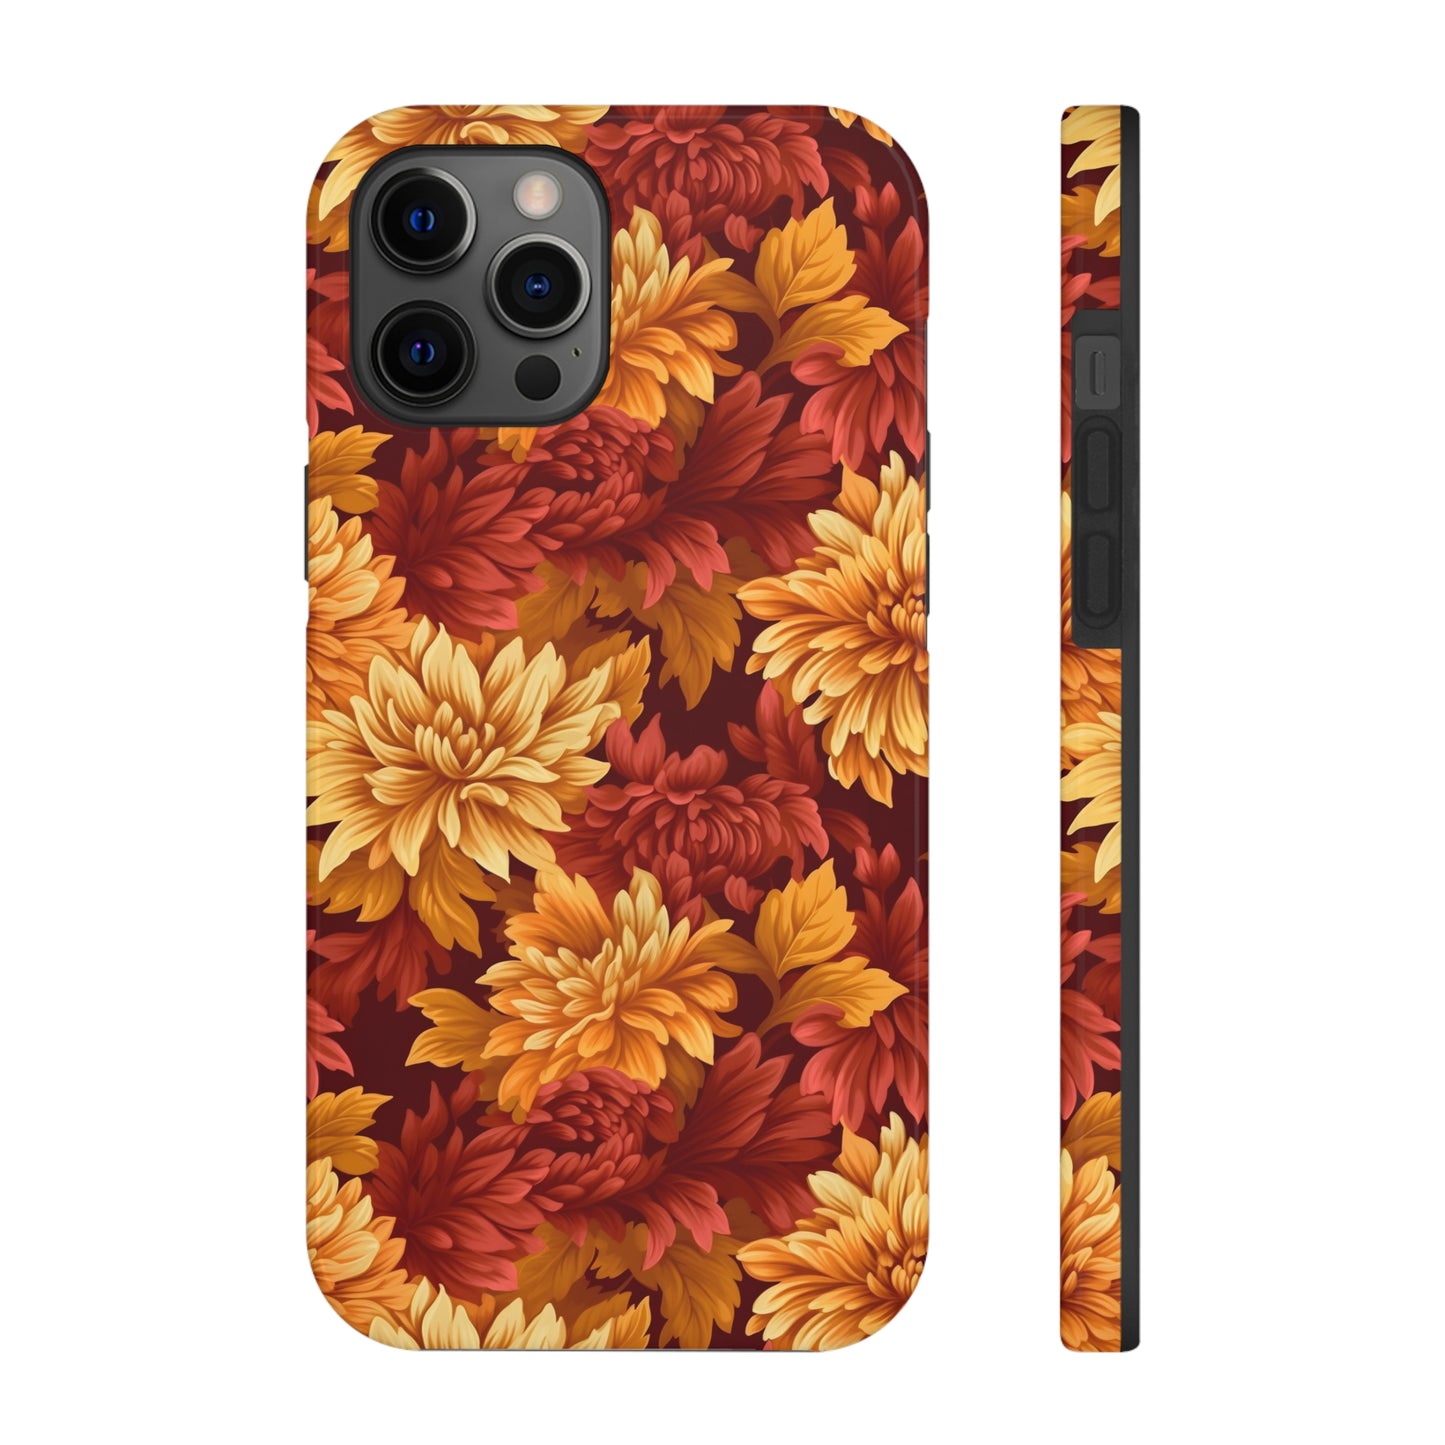 Fall Phone Case / Autumn Floral Iphone Case